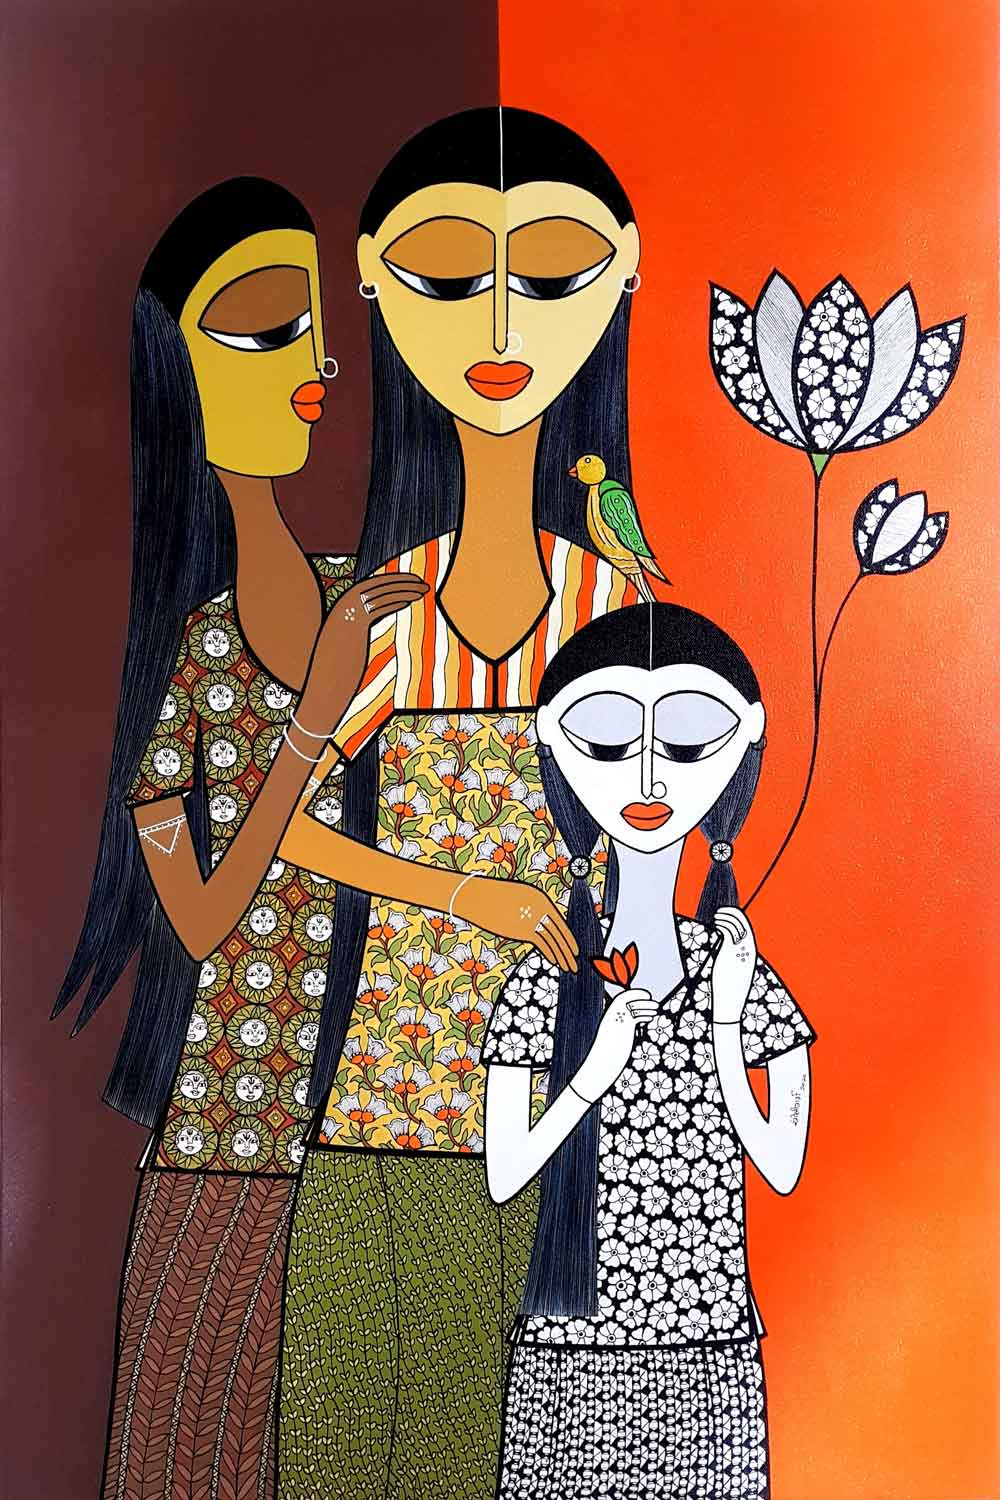 Figurative Painting with Acrylic on Canvas "Maa-Love of Mother" art by Rangoli Garg